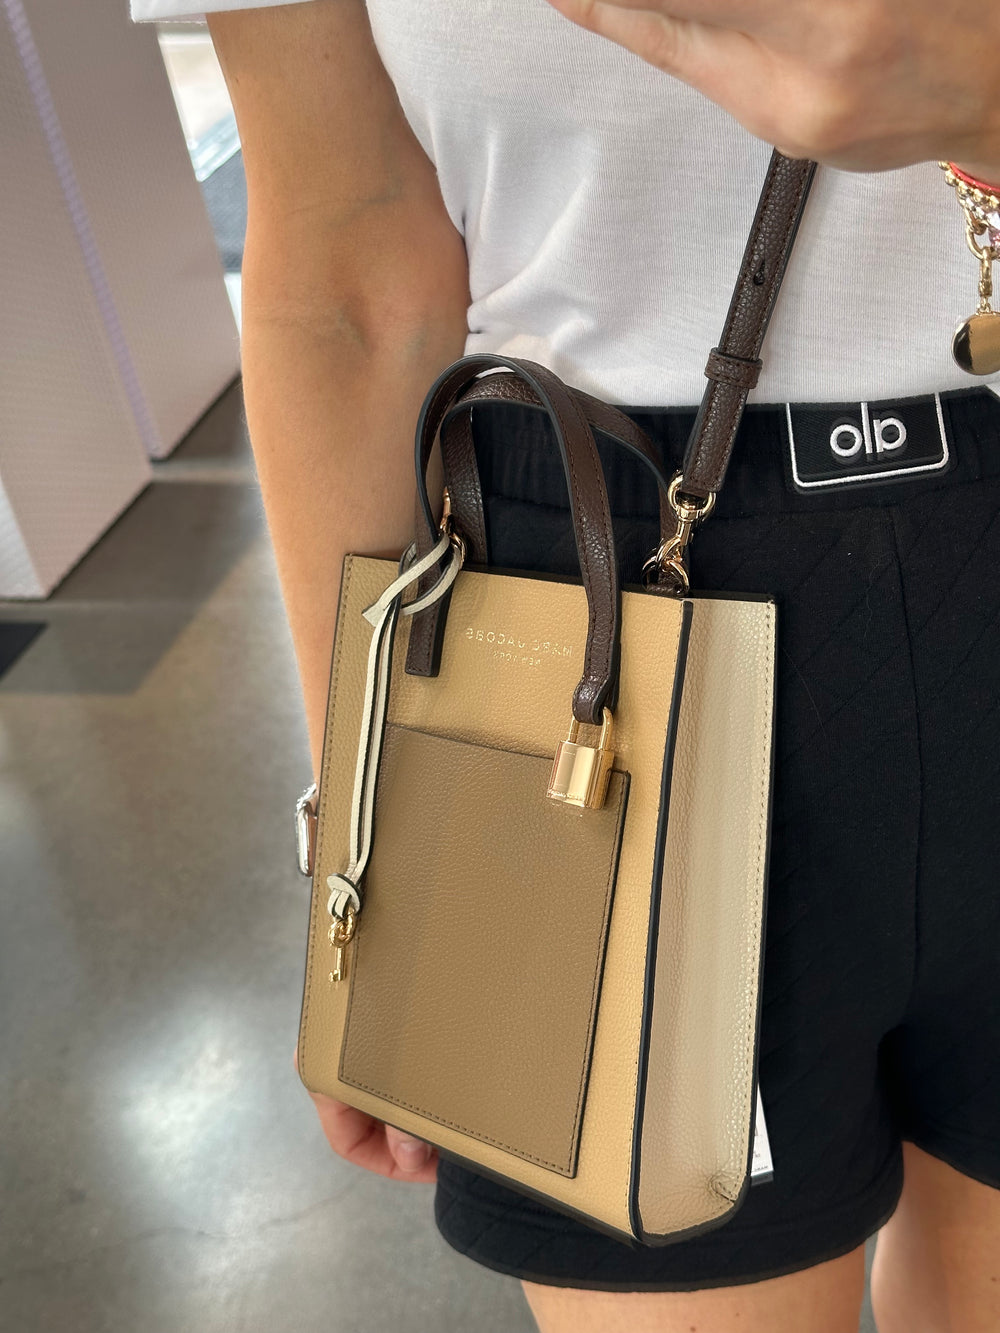 MARC JACOBS MICRO LEATHER TOTE BAG VS MINI LEATHER TOTE BAG IN